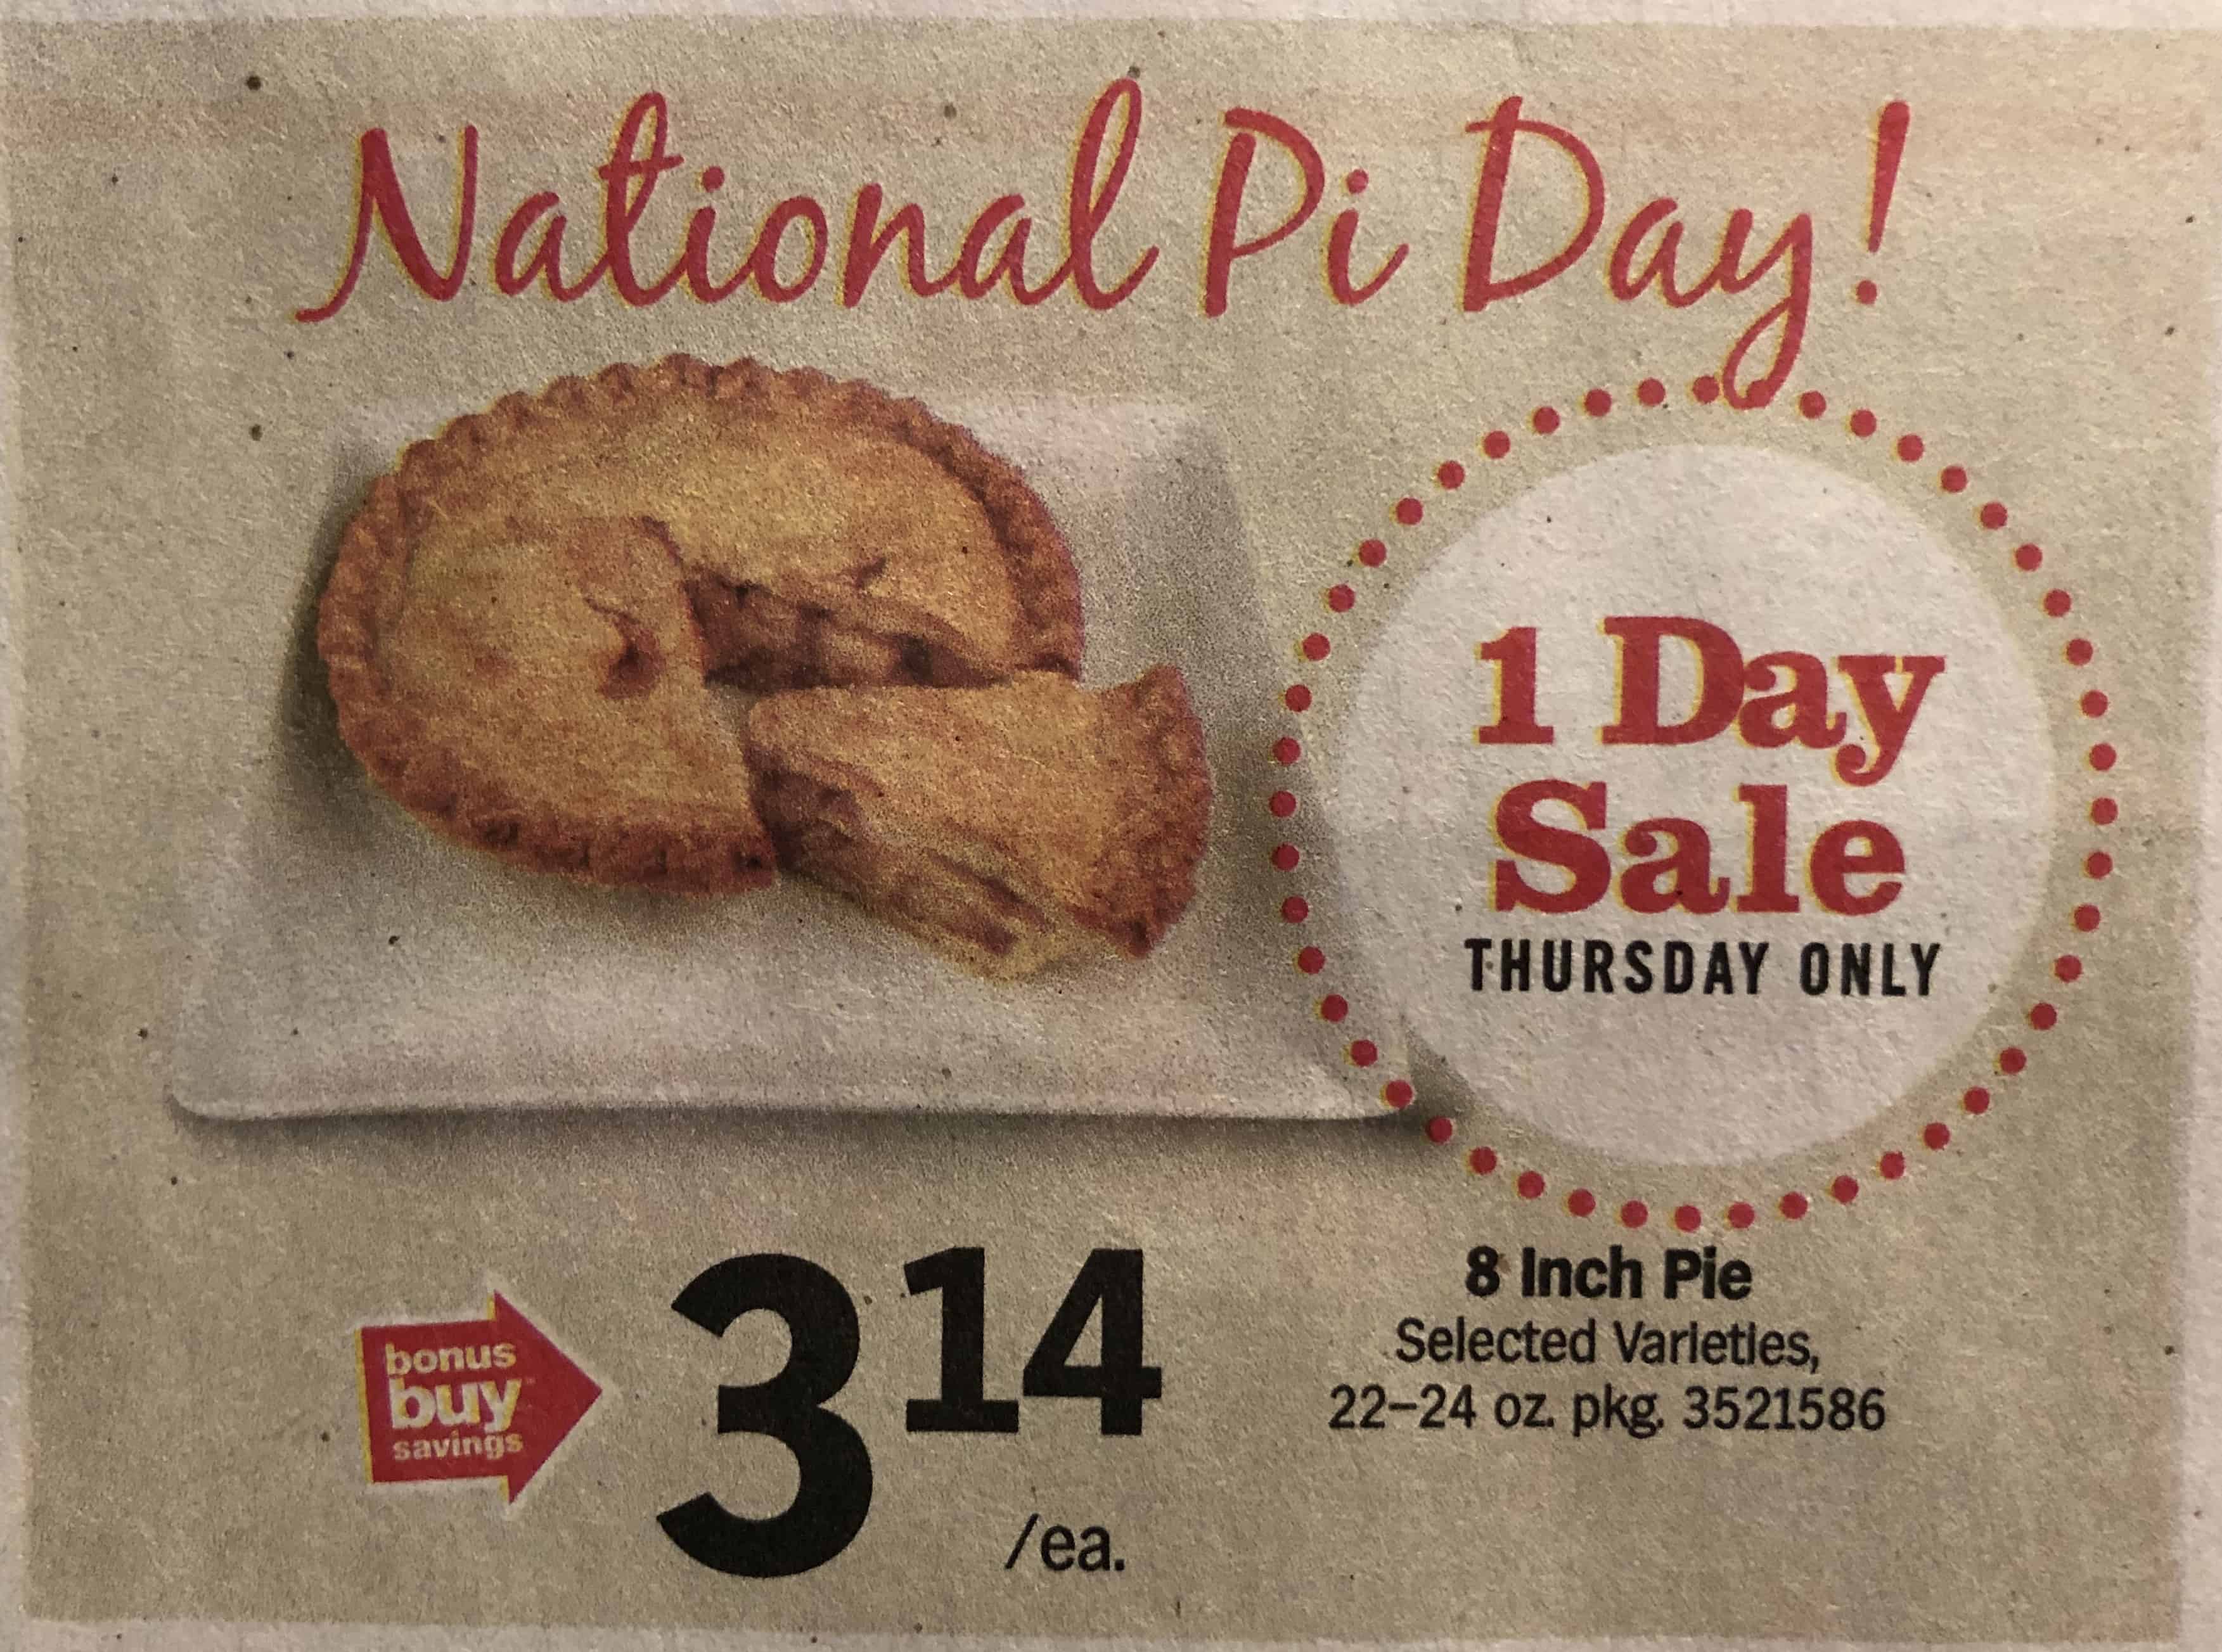 Giant: Giant Brand 8 Inch Pie Just $3.14 Each 3/14 ONLY!